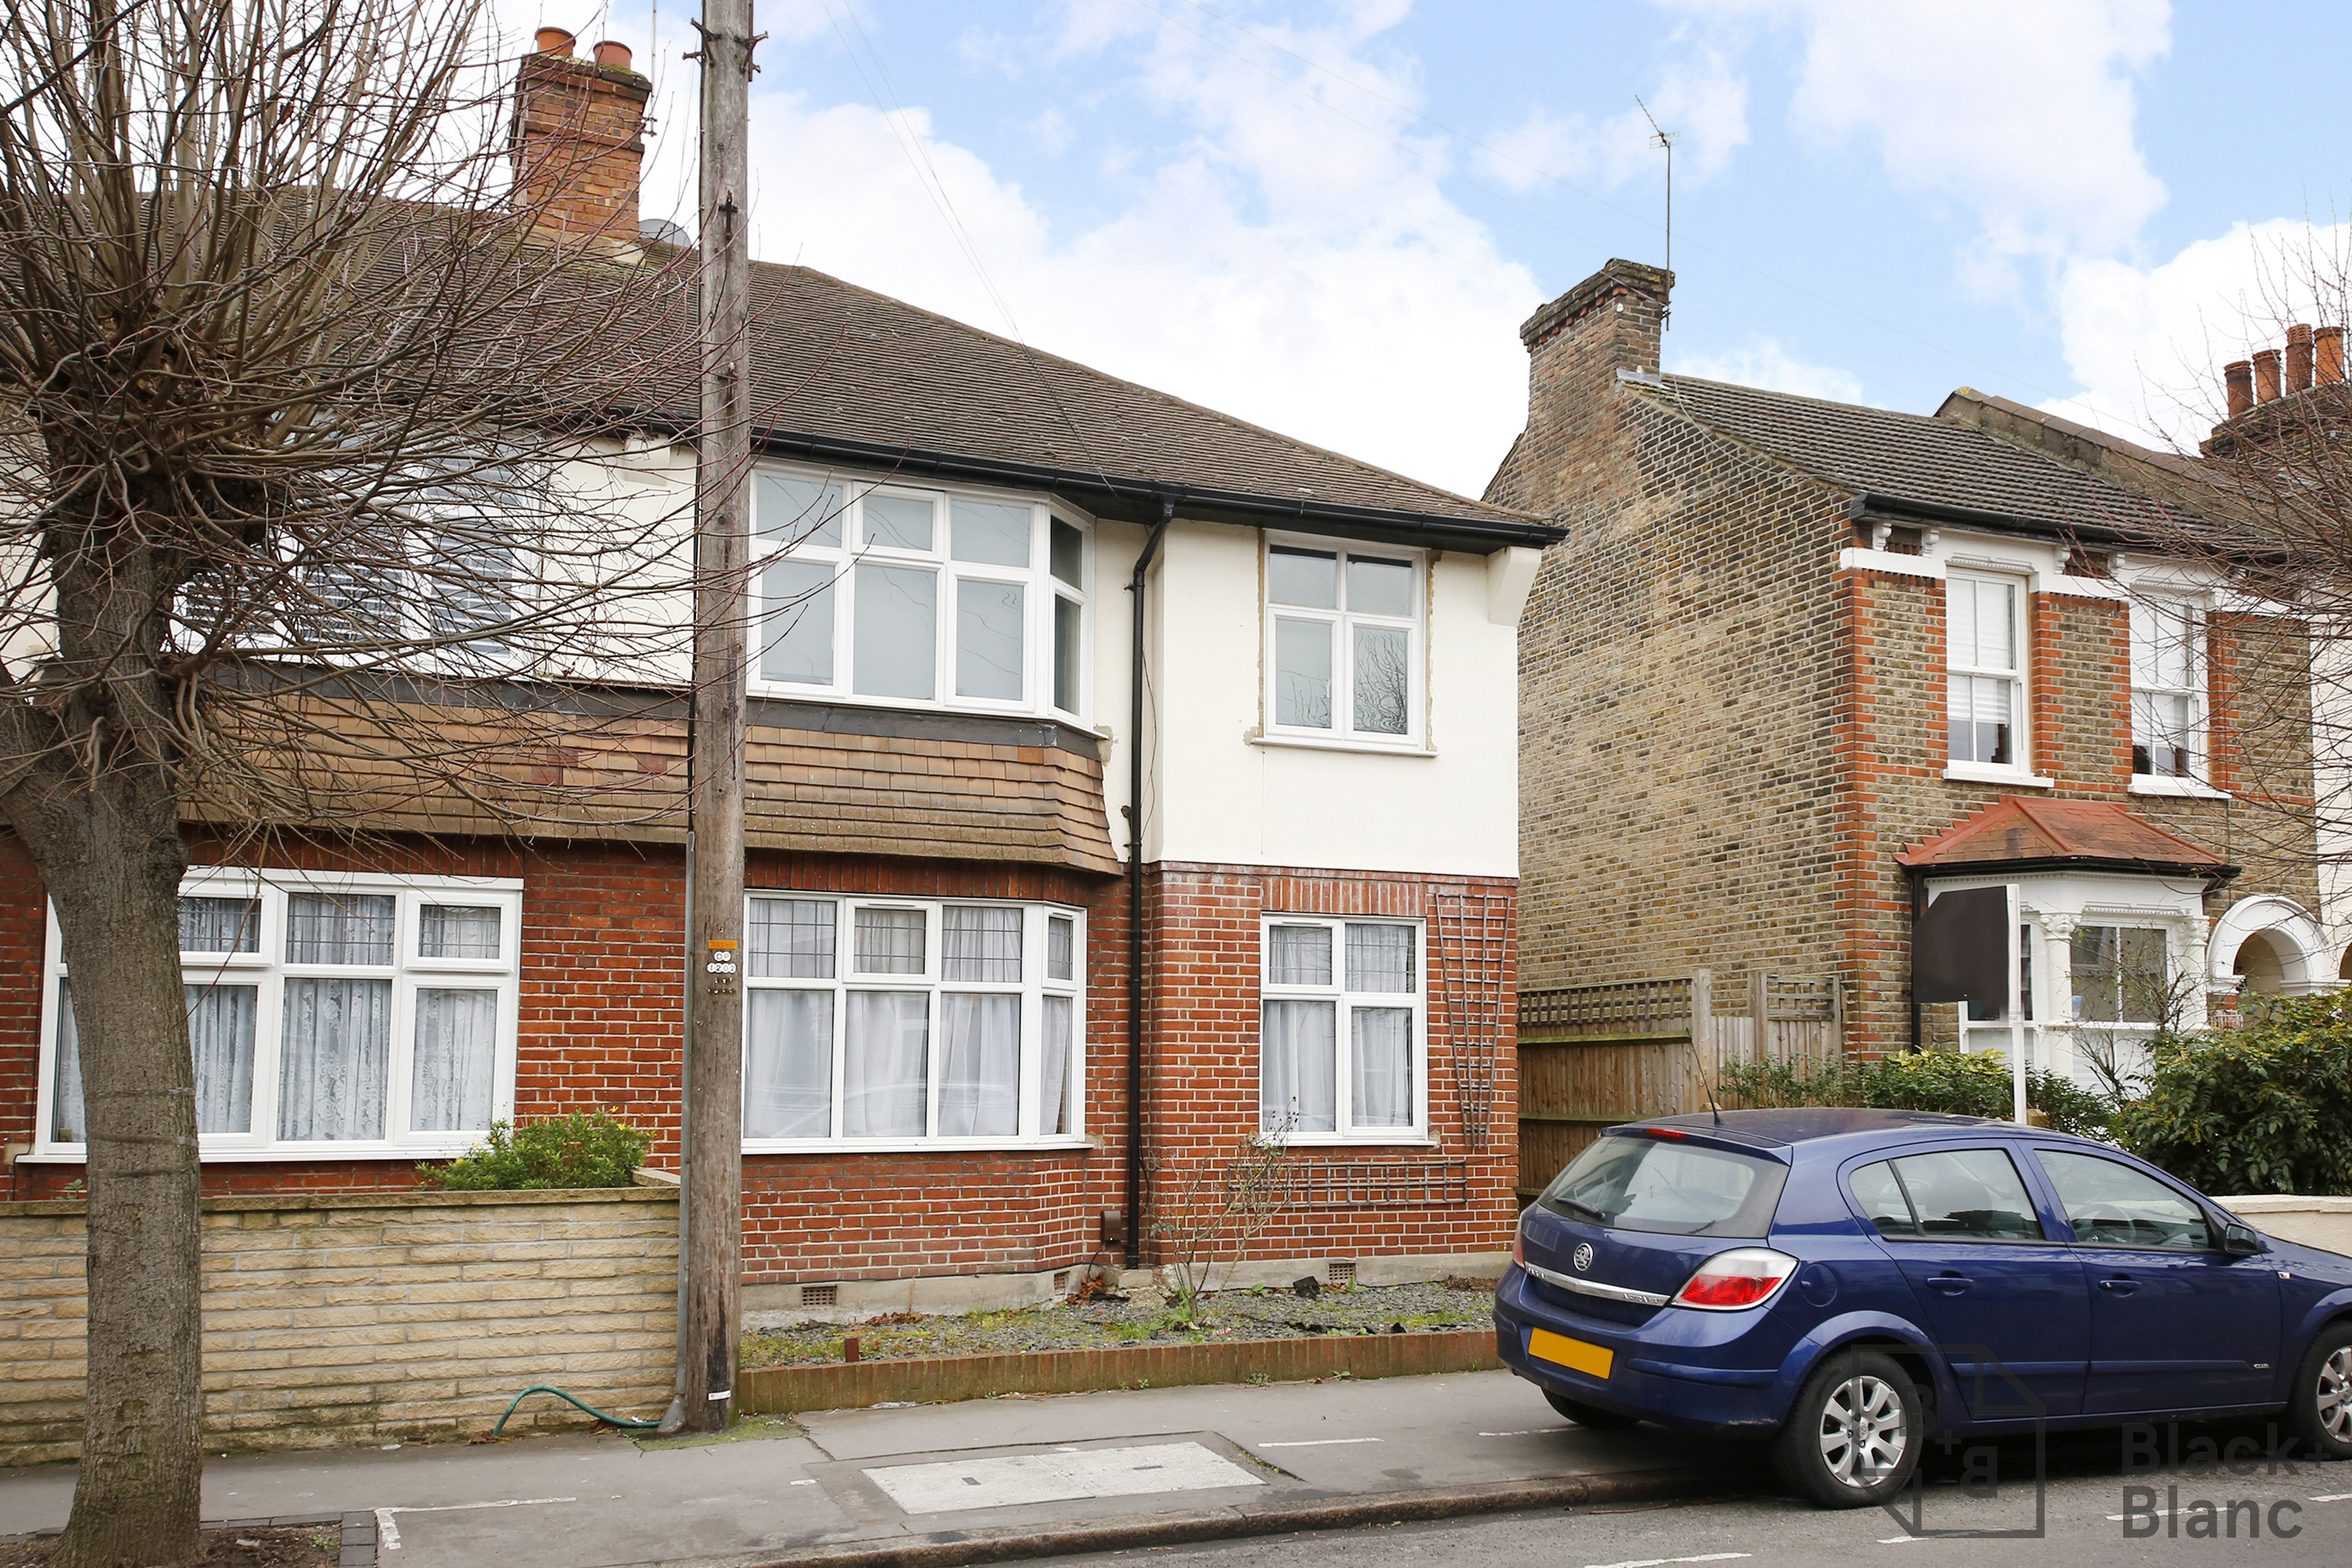 2 bed apartment for sale in Davidson Road, Croydon - Property Image 1